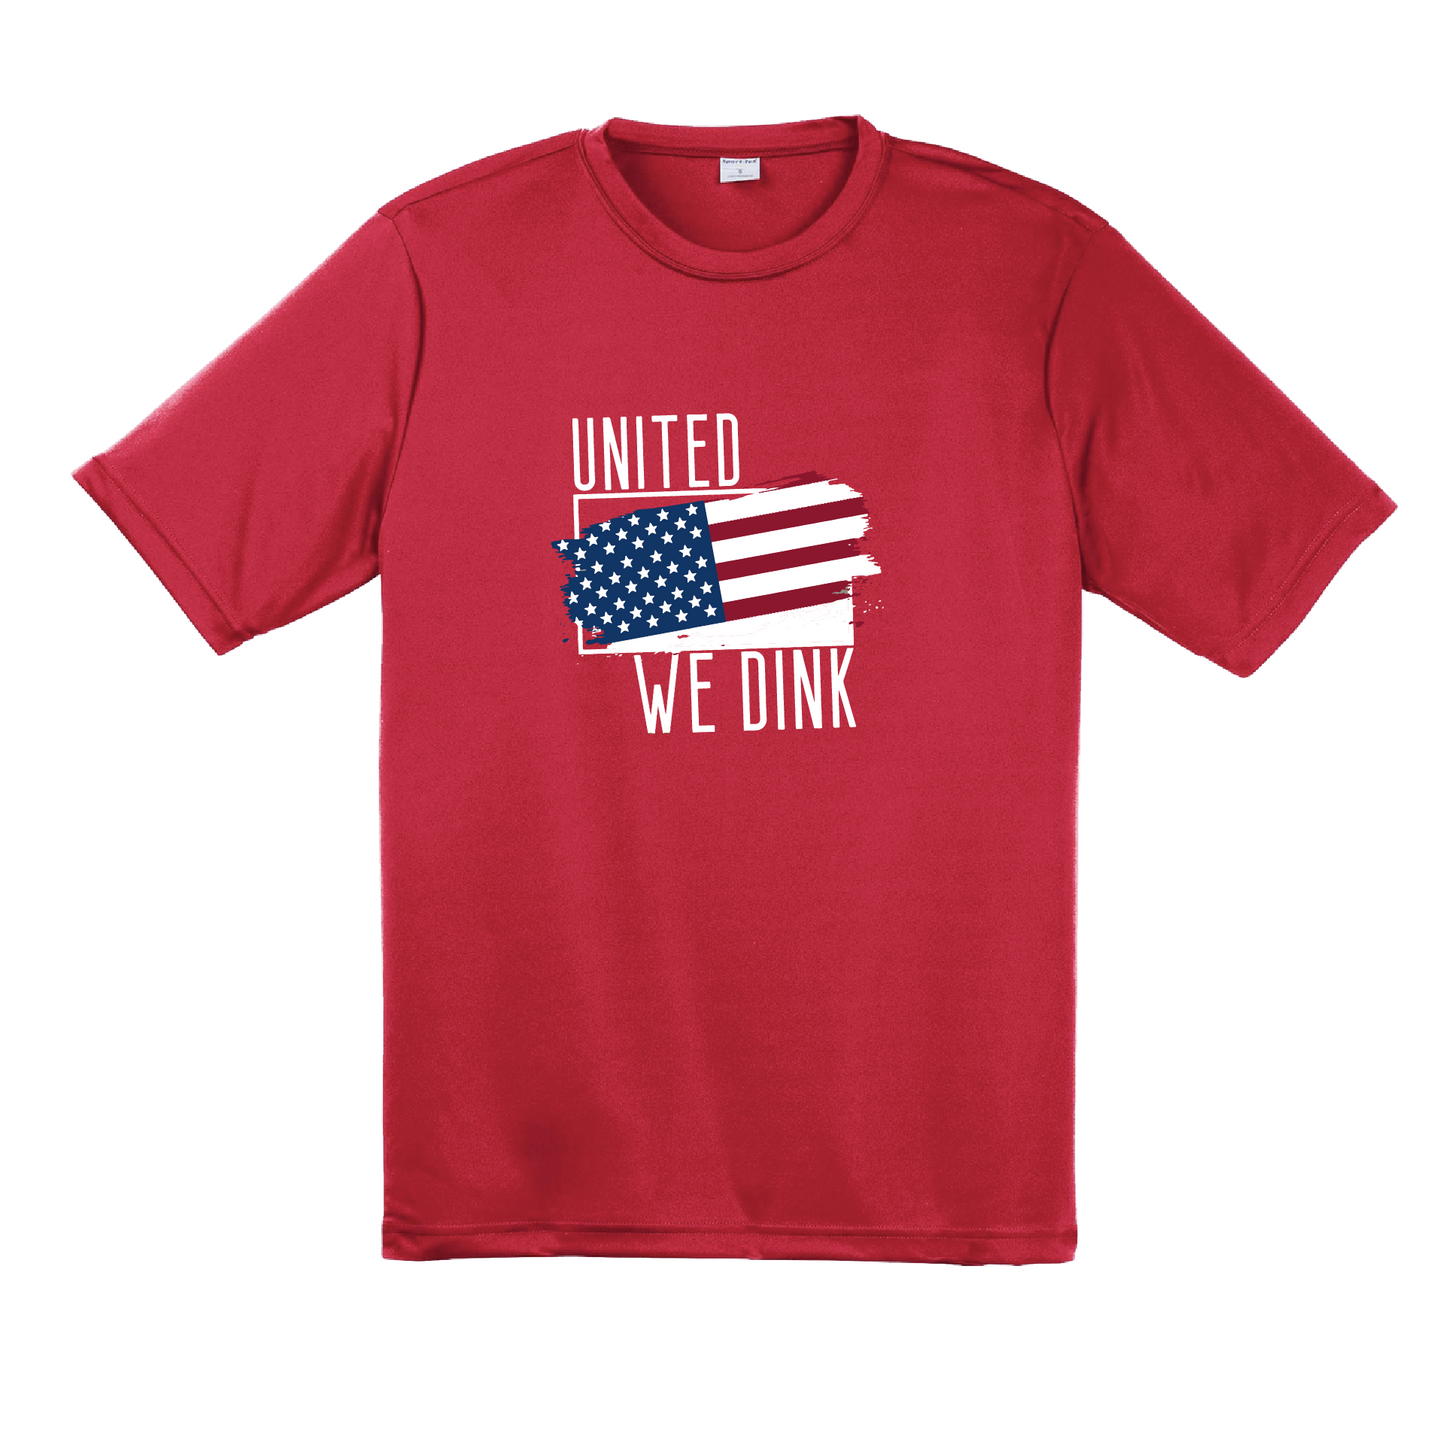 Pickleball Design: United We Dink.   Men's Styles: Short-Sleeve  Shirts are lightweight, roomy and highly breathable. These moisture-wicking shirts are designed for athletic performance. They feature PosiCharge technology to lock in color and prevent logos from fading. Removable tag and set-in sleeves for comfort.